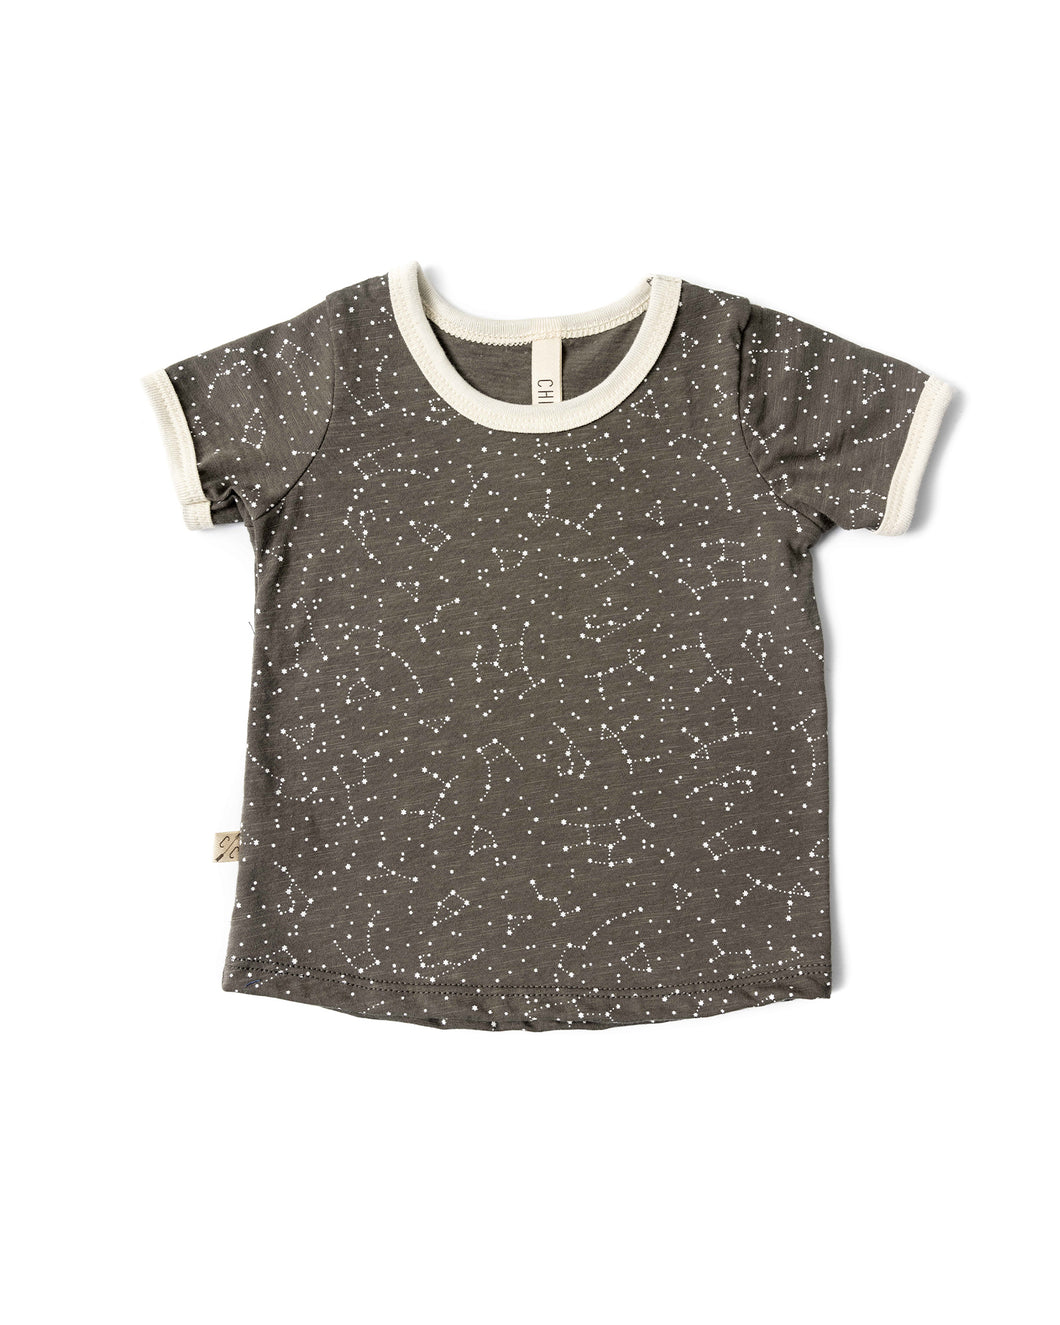 ringer tee - constellations on faded black